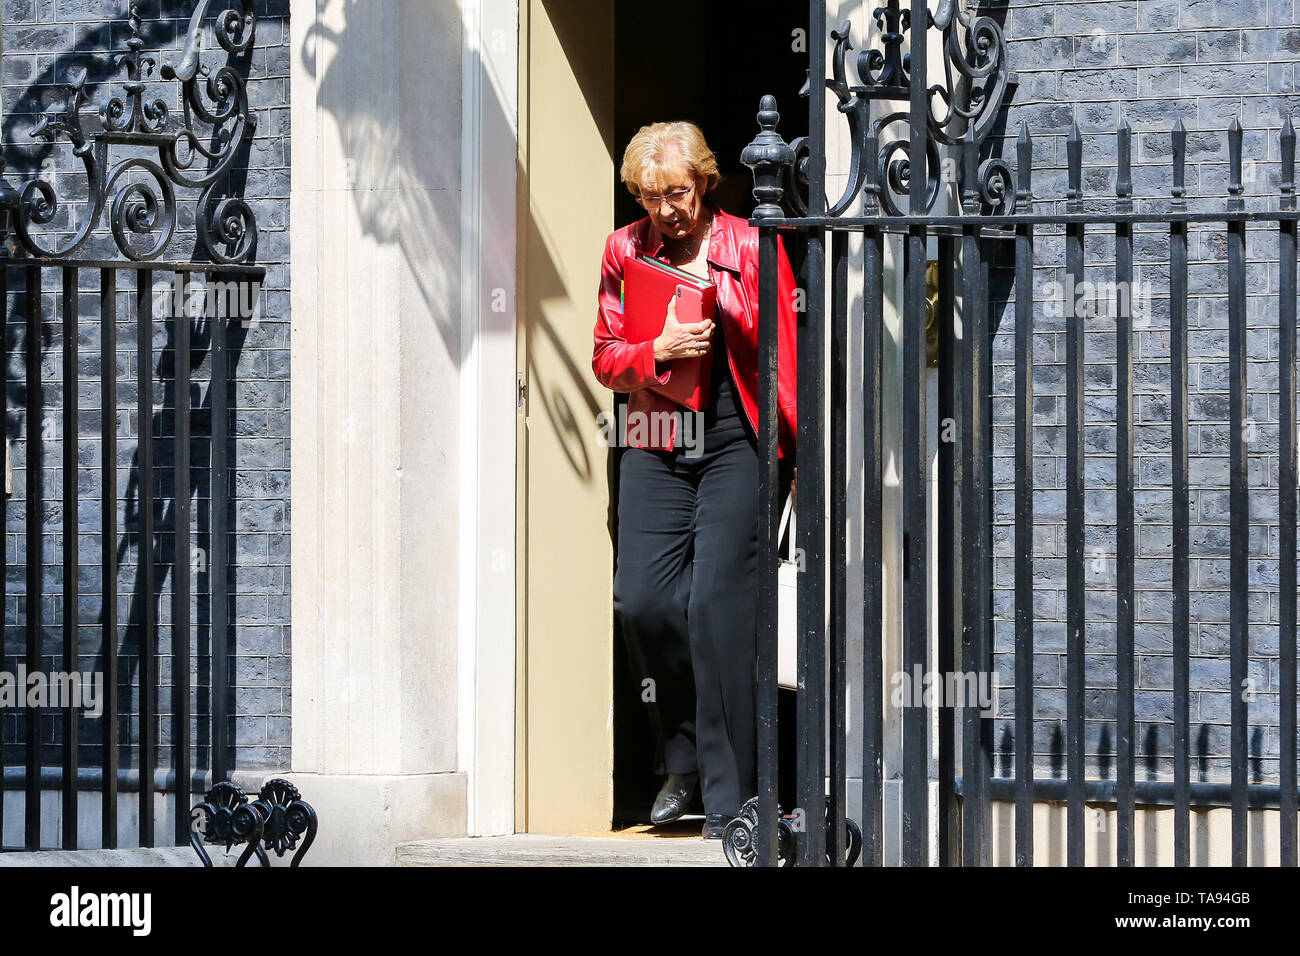 Andrea Leadsom seen at Downing Street. Andrea Leadsom has resigned as the Leader of the House of Commons, saying that she cannot support the Theresa May's Brexit bill. Stock Photo